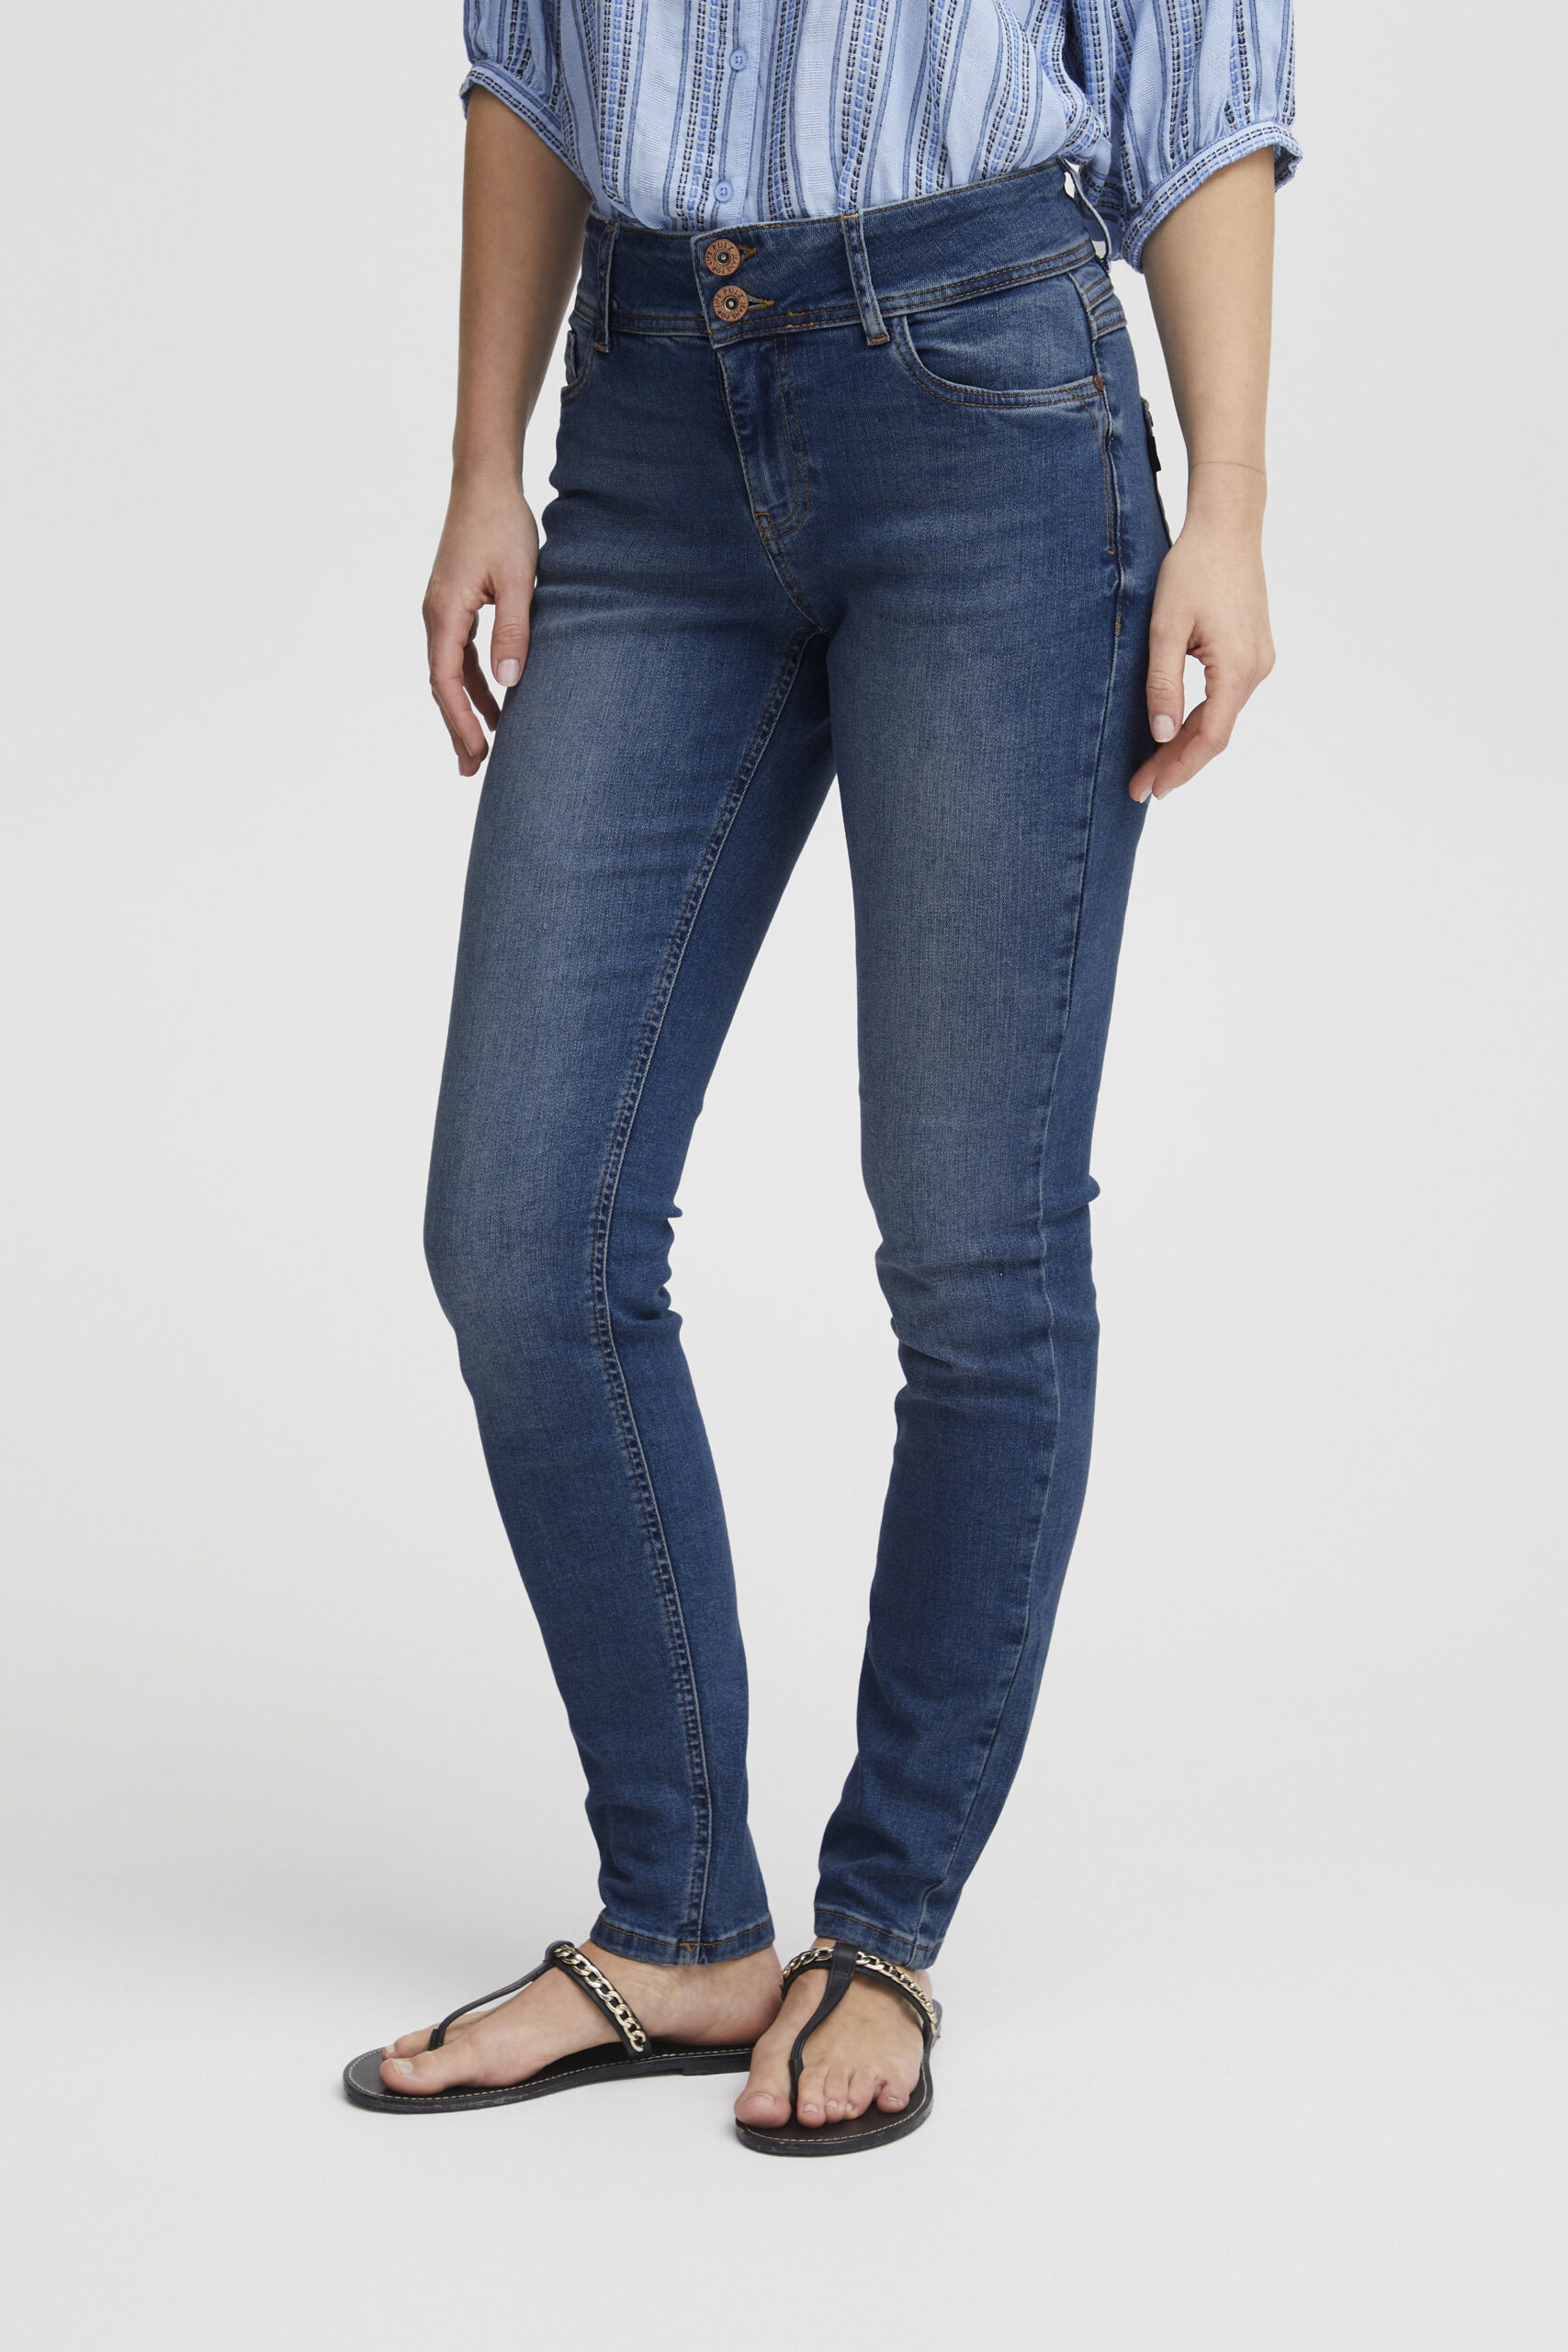 Suzy Blue Curved Skinny Leg item front